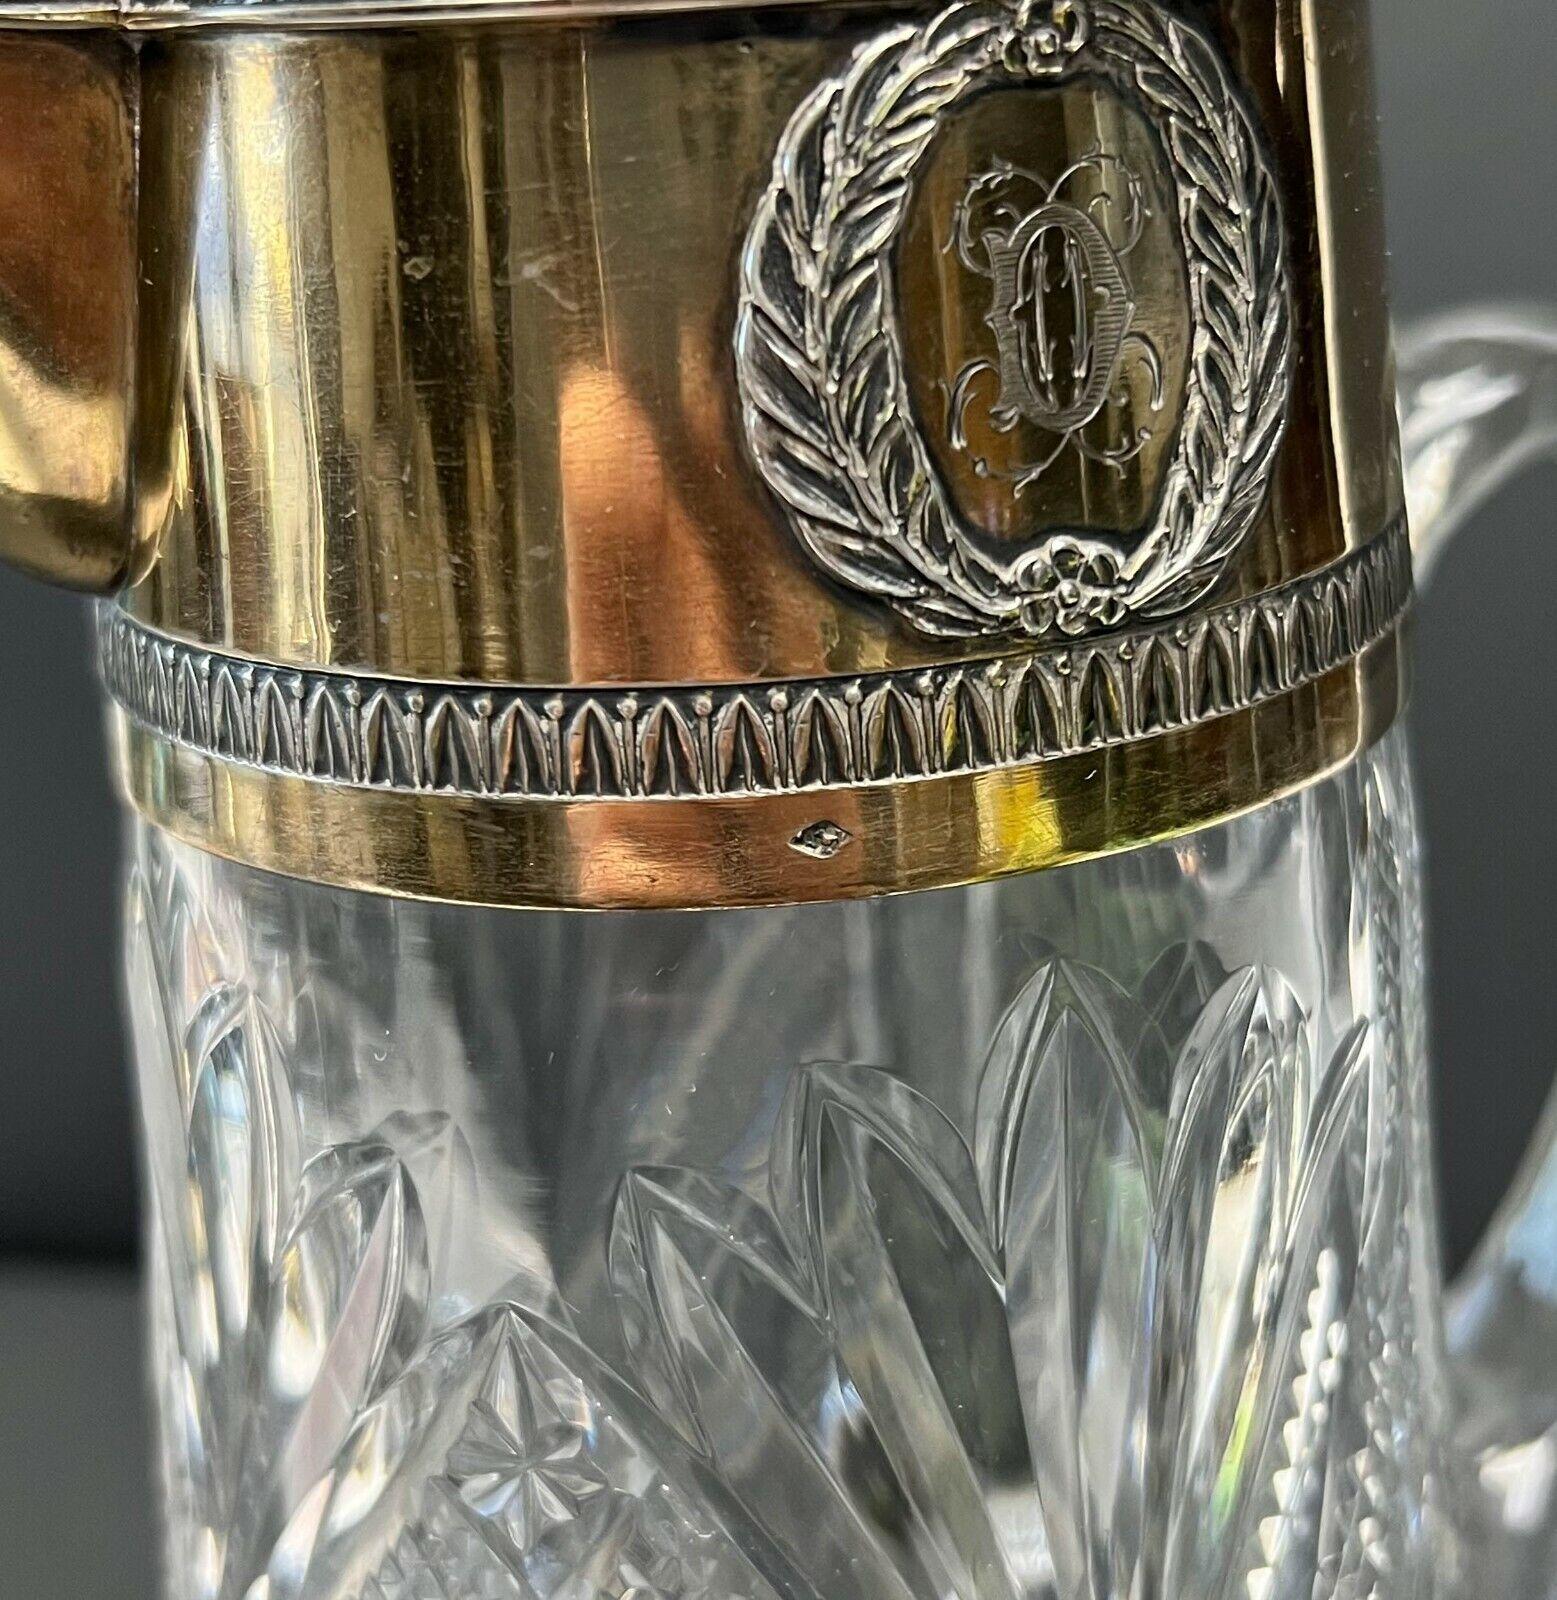 Auguste Leroy & Cie France Gilt 950 Silver Mounted Cut Glass Pitcher, circa 1920 In Good Condition For Sale In Gardena, CA